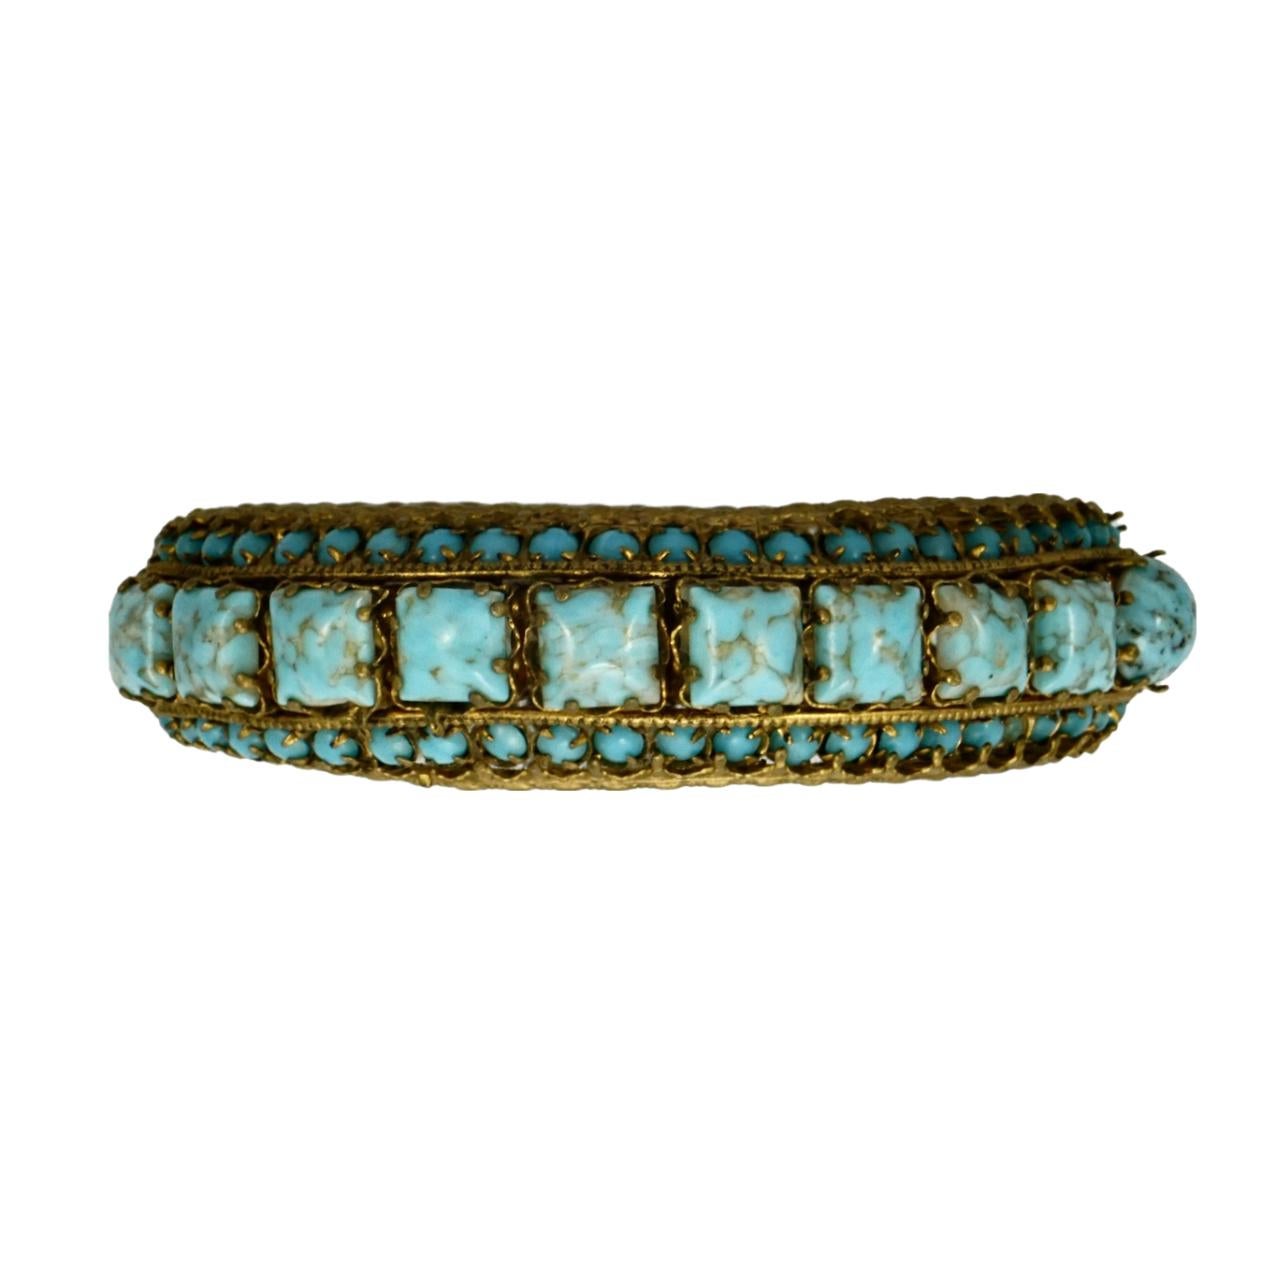 Fabulous ornate gold plated and black enamel bracelet set with hubbell stones (faux turquoise). Measuring inside diameter length 6.1 cm / 2.4 inches by inside width 5 cm / 1.9 inches. The width is 1.9 cm / .74 inches.

There is wear to the gold